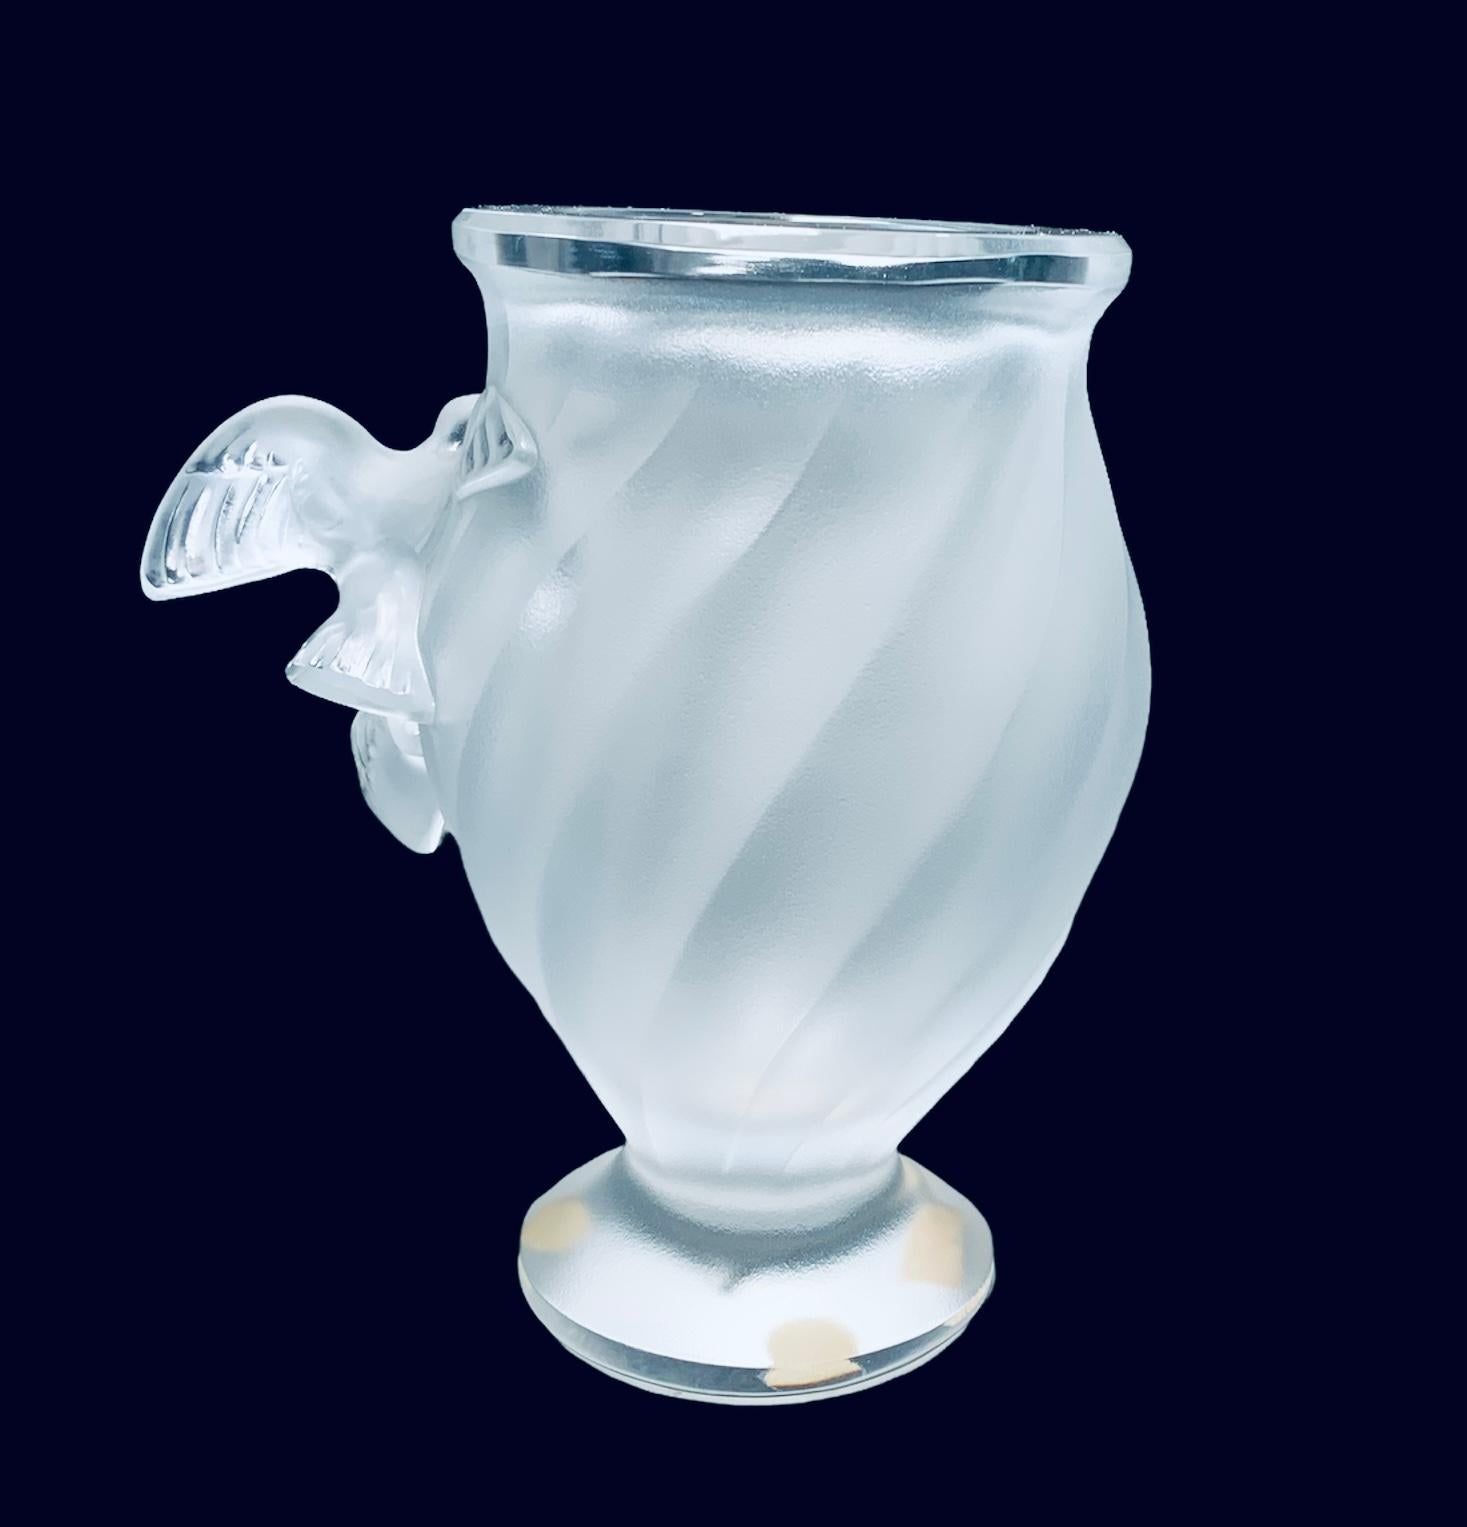 This is a Lalique clear/frosted crystal vase. It depicts two Rosine birds on flight in the center of the vase. There are some delicate ribbed swirls adorning the crystal. The Lalique, Paris sticker is under the base.